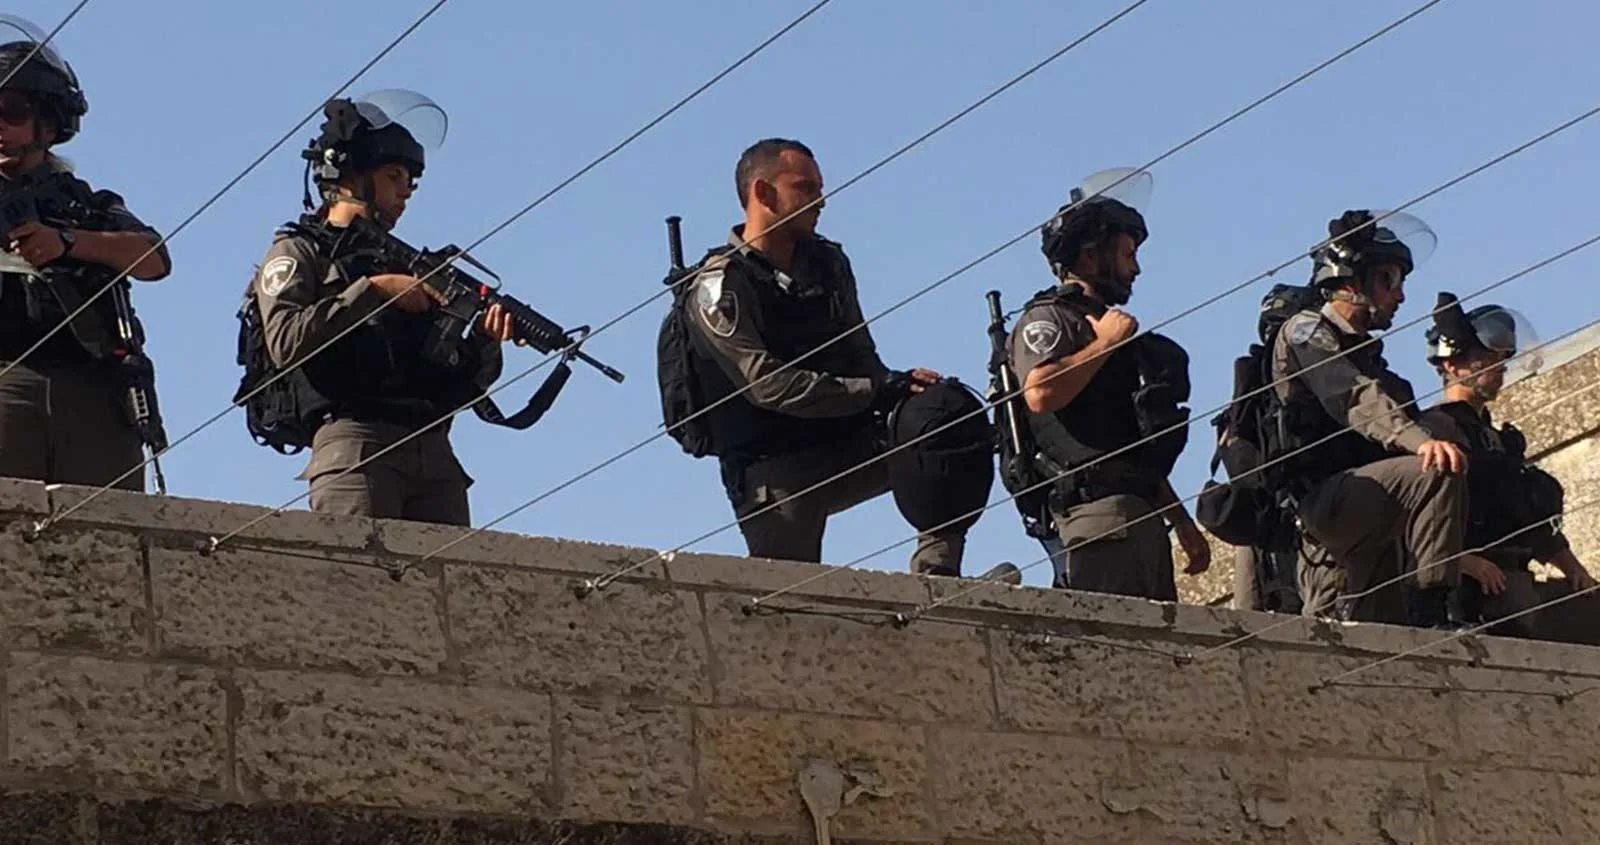 Armed guards stand on top of a wall.